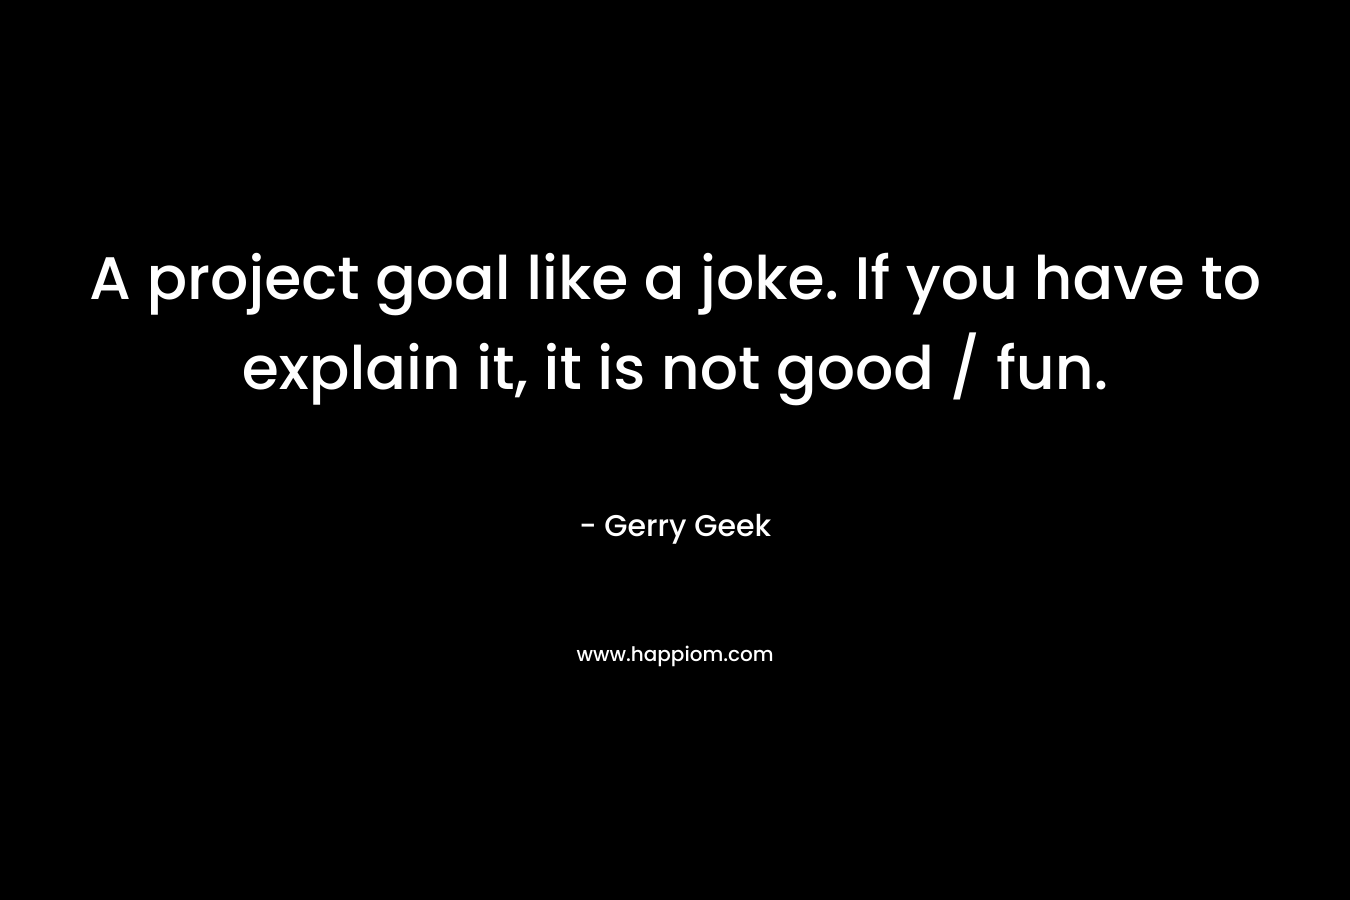 A project goal like a joke. If you have to explain it, it is not good / fun. – Gerry Geek